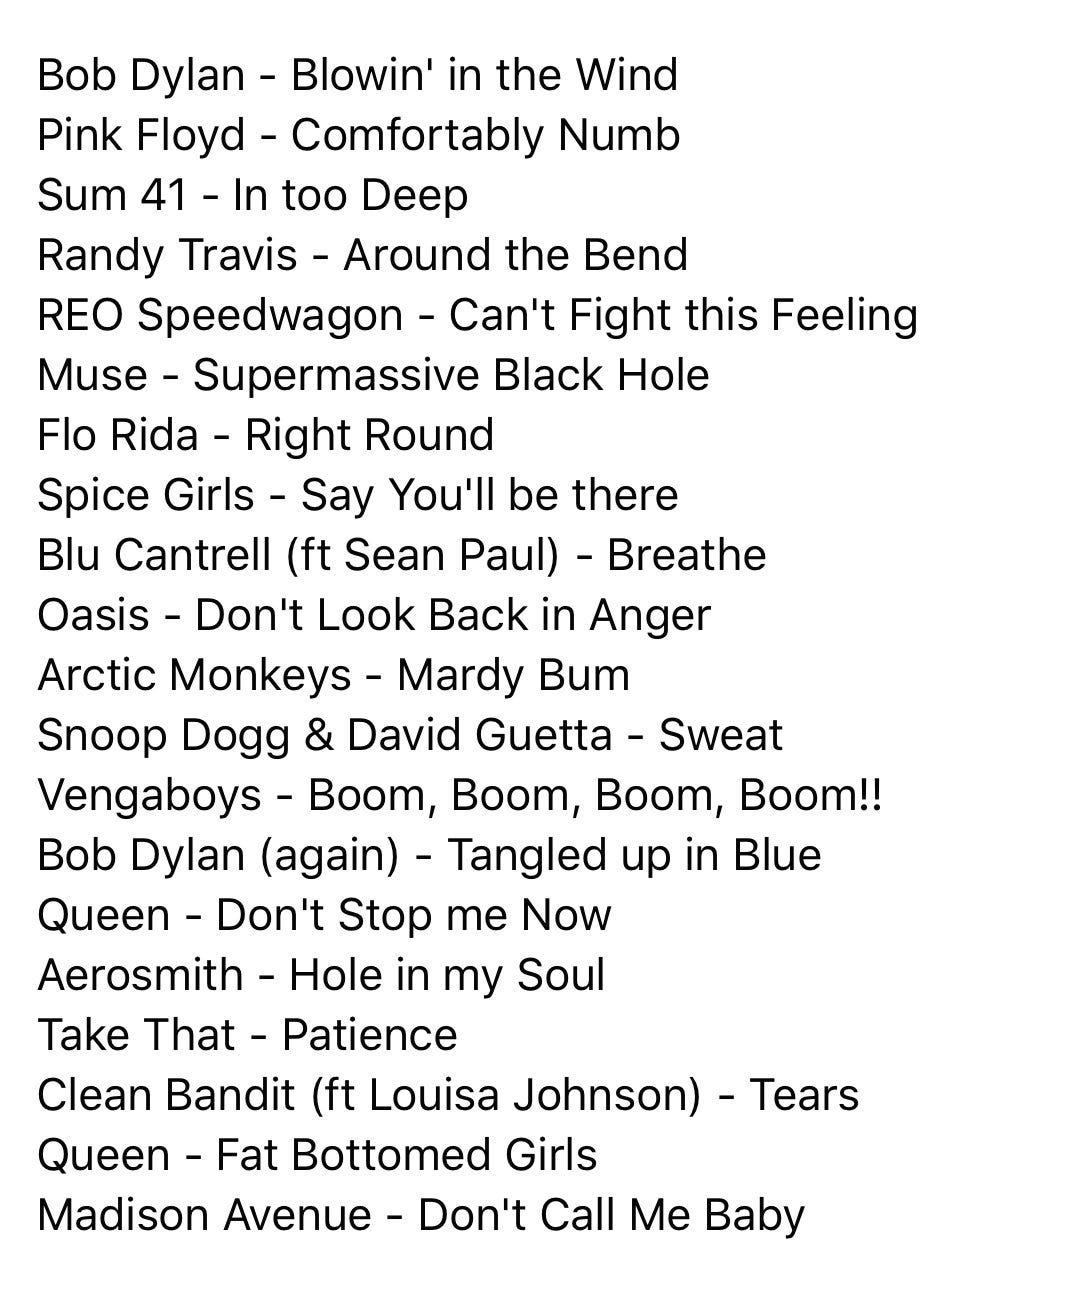 Keith Siau on Twitter: "Songs that should be blocked from your colonoscopy  playlist 😅 Any others that should be on this list?  https://t.co/LcV0TUDI6s" / Twitter